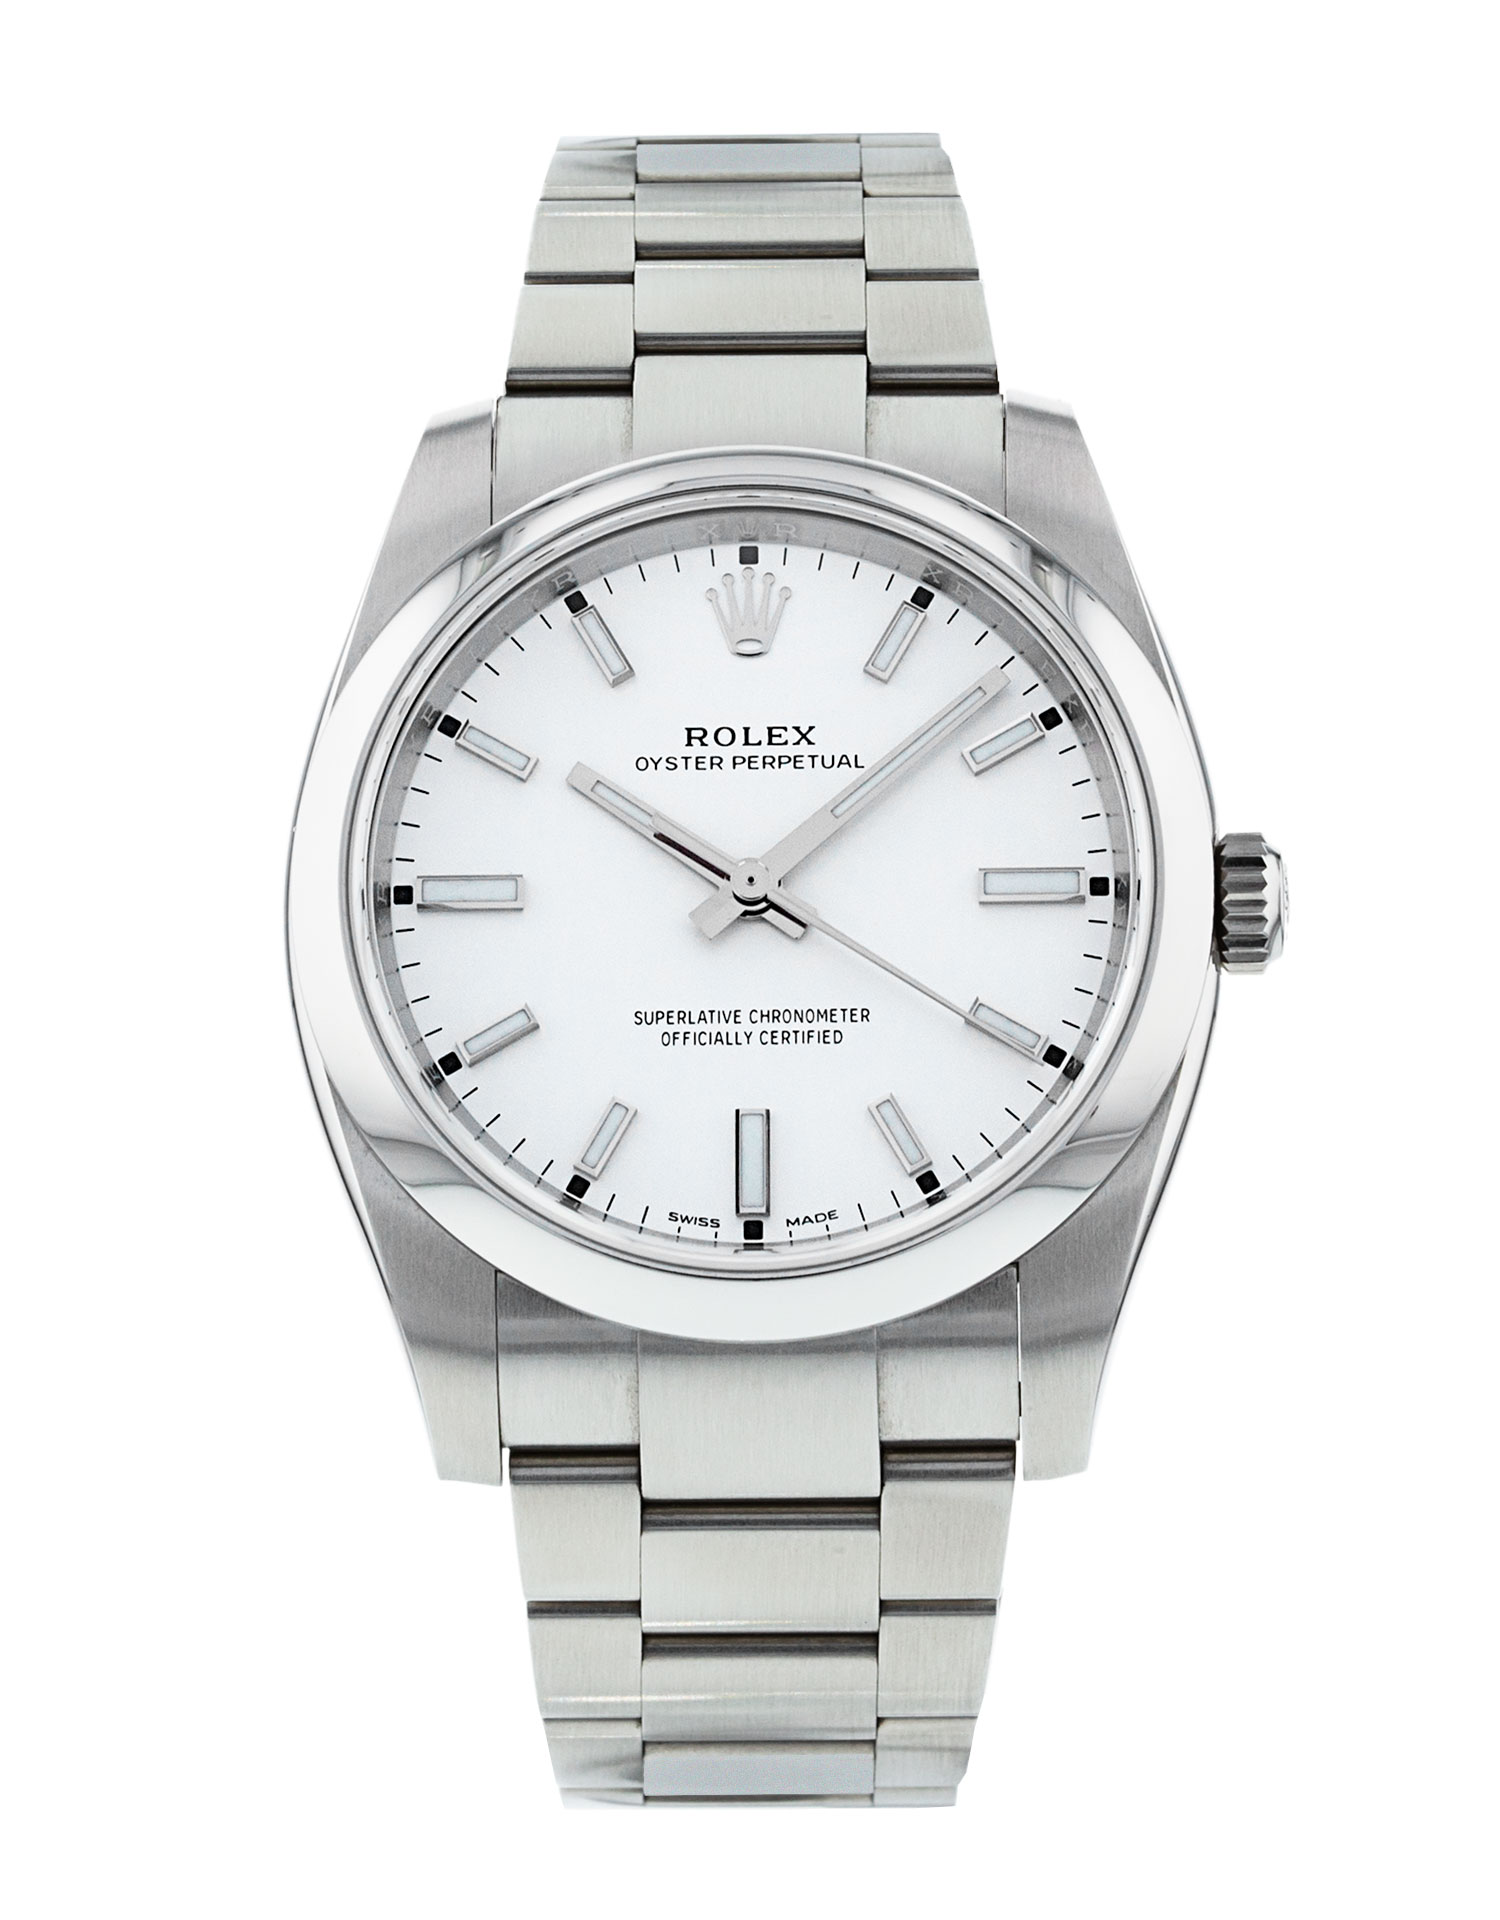 Rolex Oyster Perpetual (114200) Price 